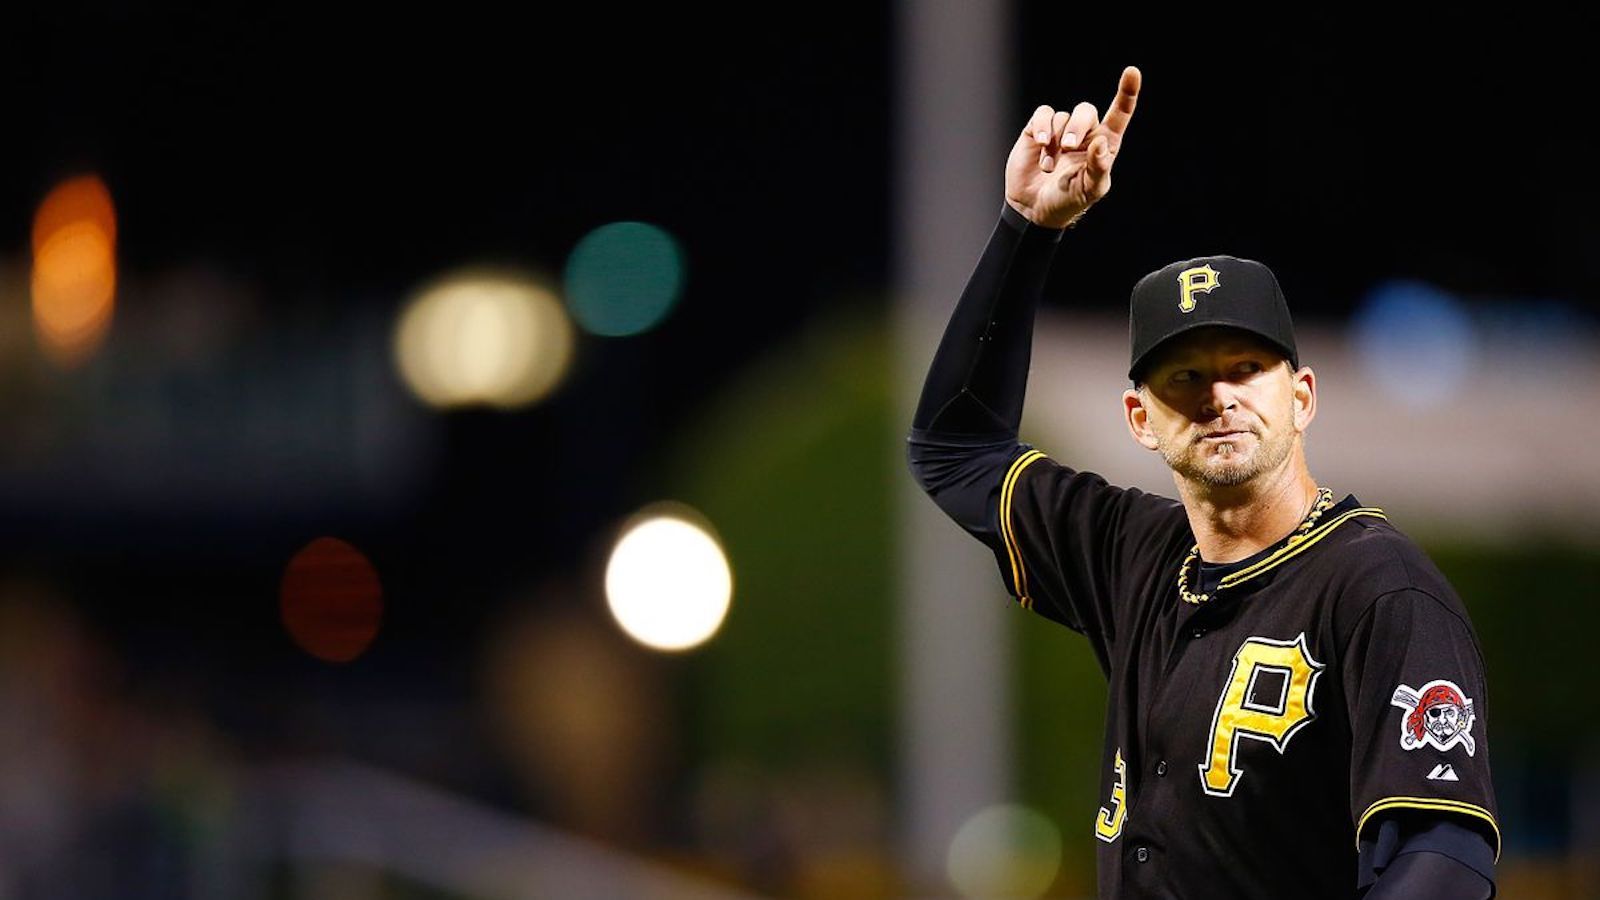 A.J. Burnett, Russell Martin reunite at PNC Park to throw 1st pitch for  Pirates' home opener